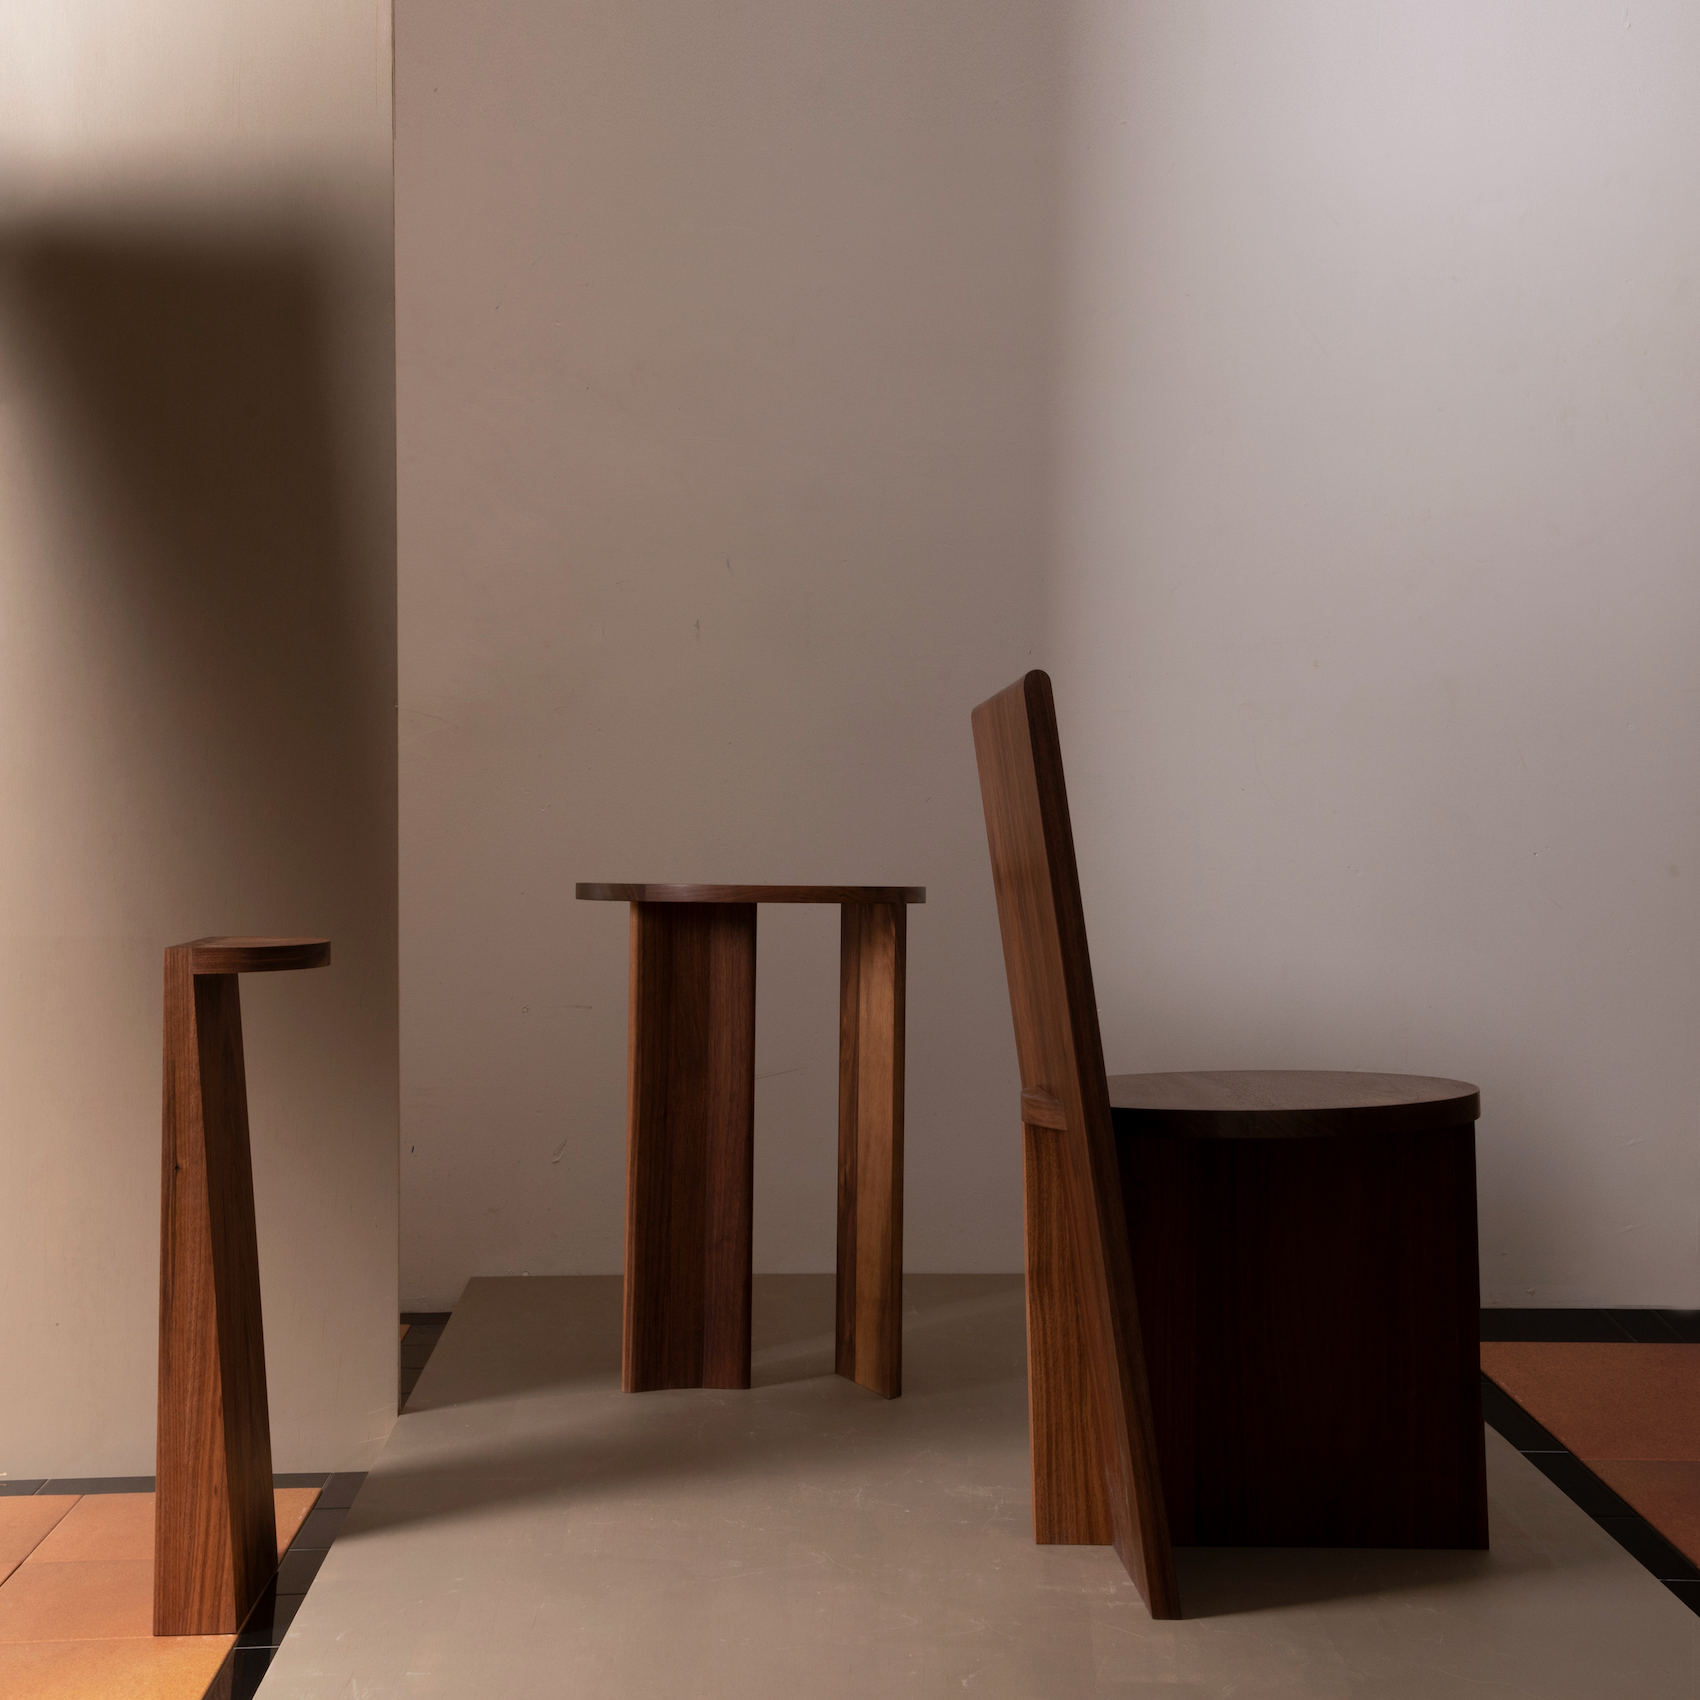 Minimalist Furniture Collection "One" by Campagna